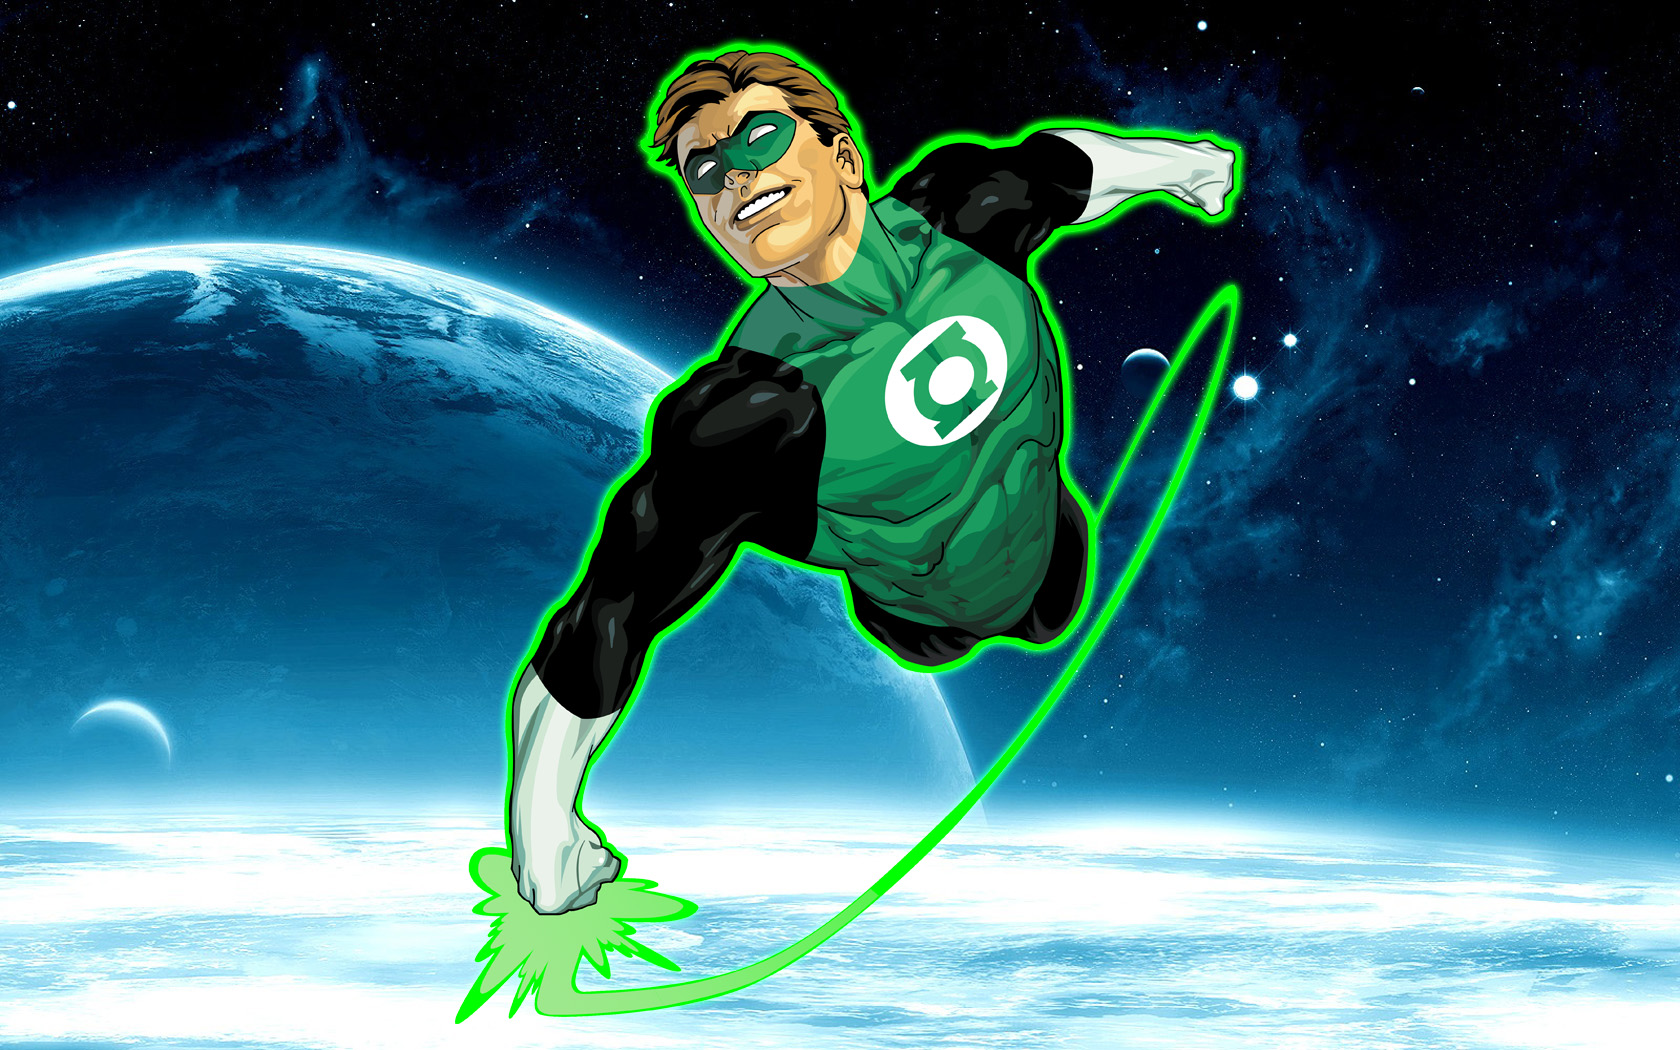 Green Lantern animated series on its way | The Daily P.O.P.